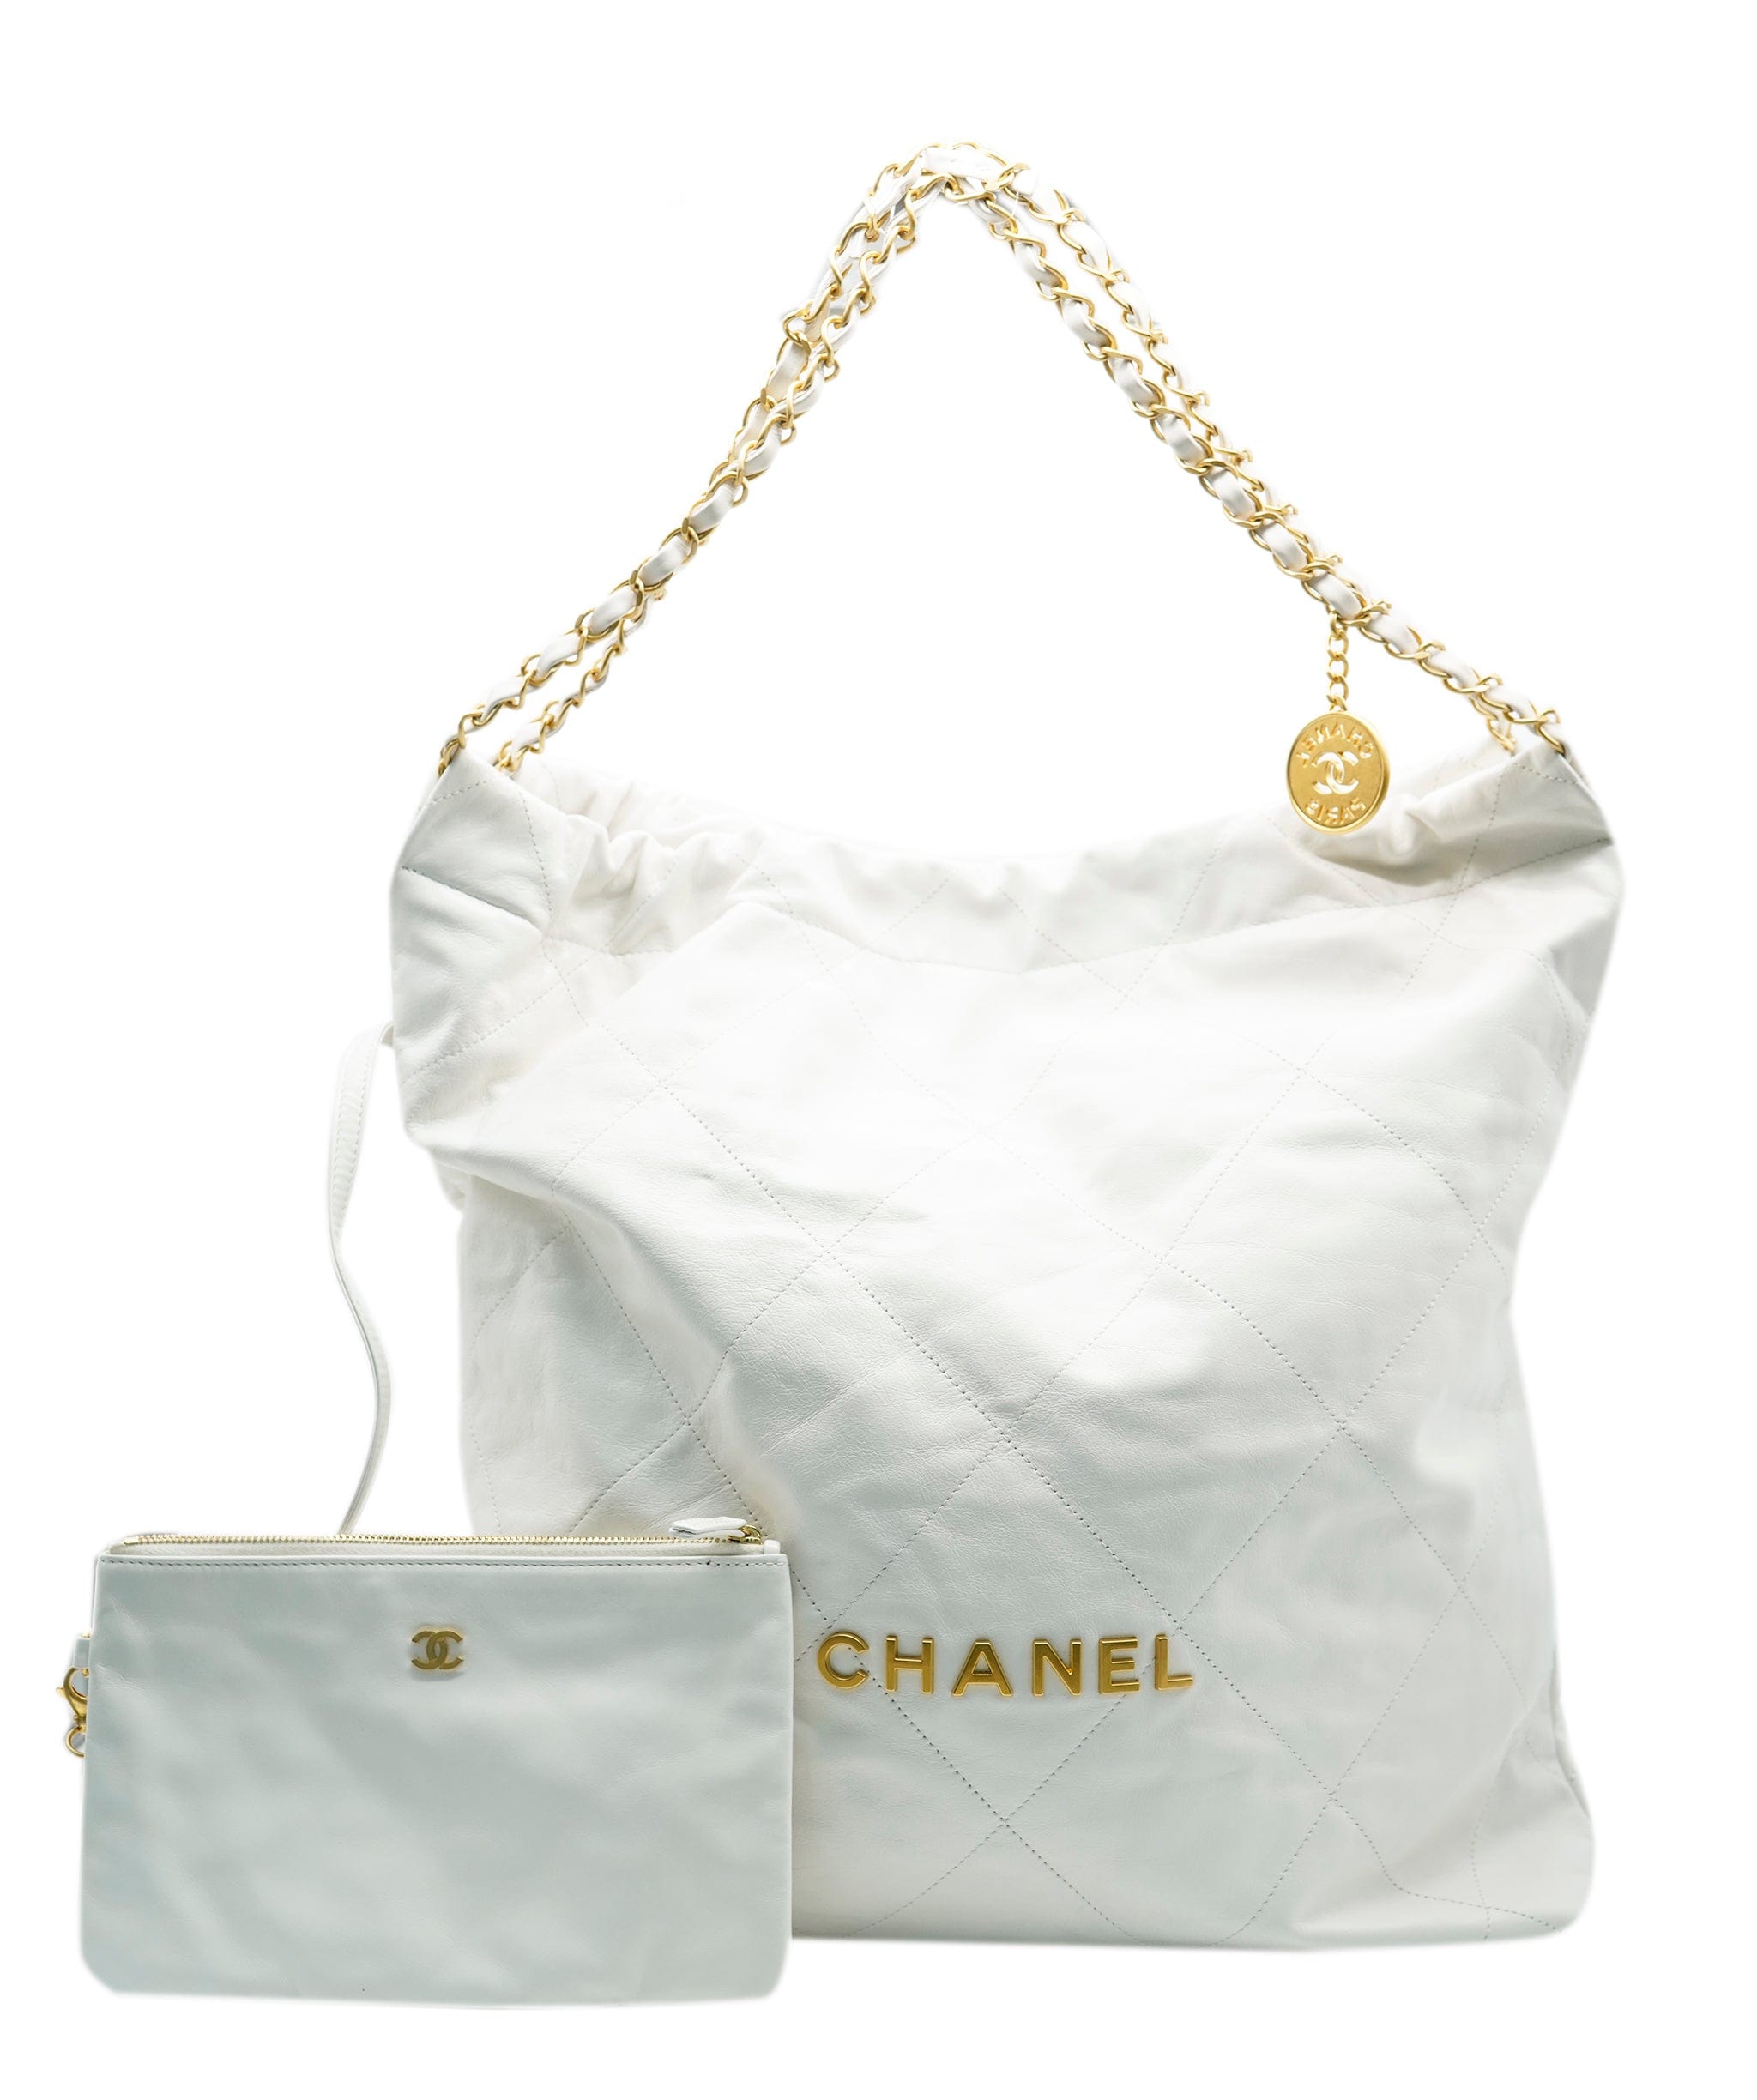 Chanel 22 leather handbag Chanel White in Leather - 35081252